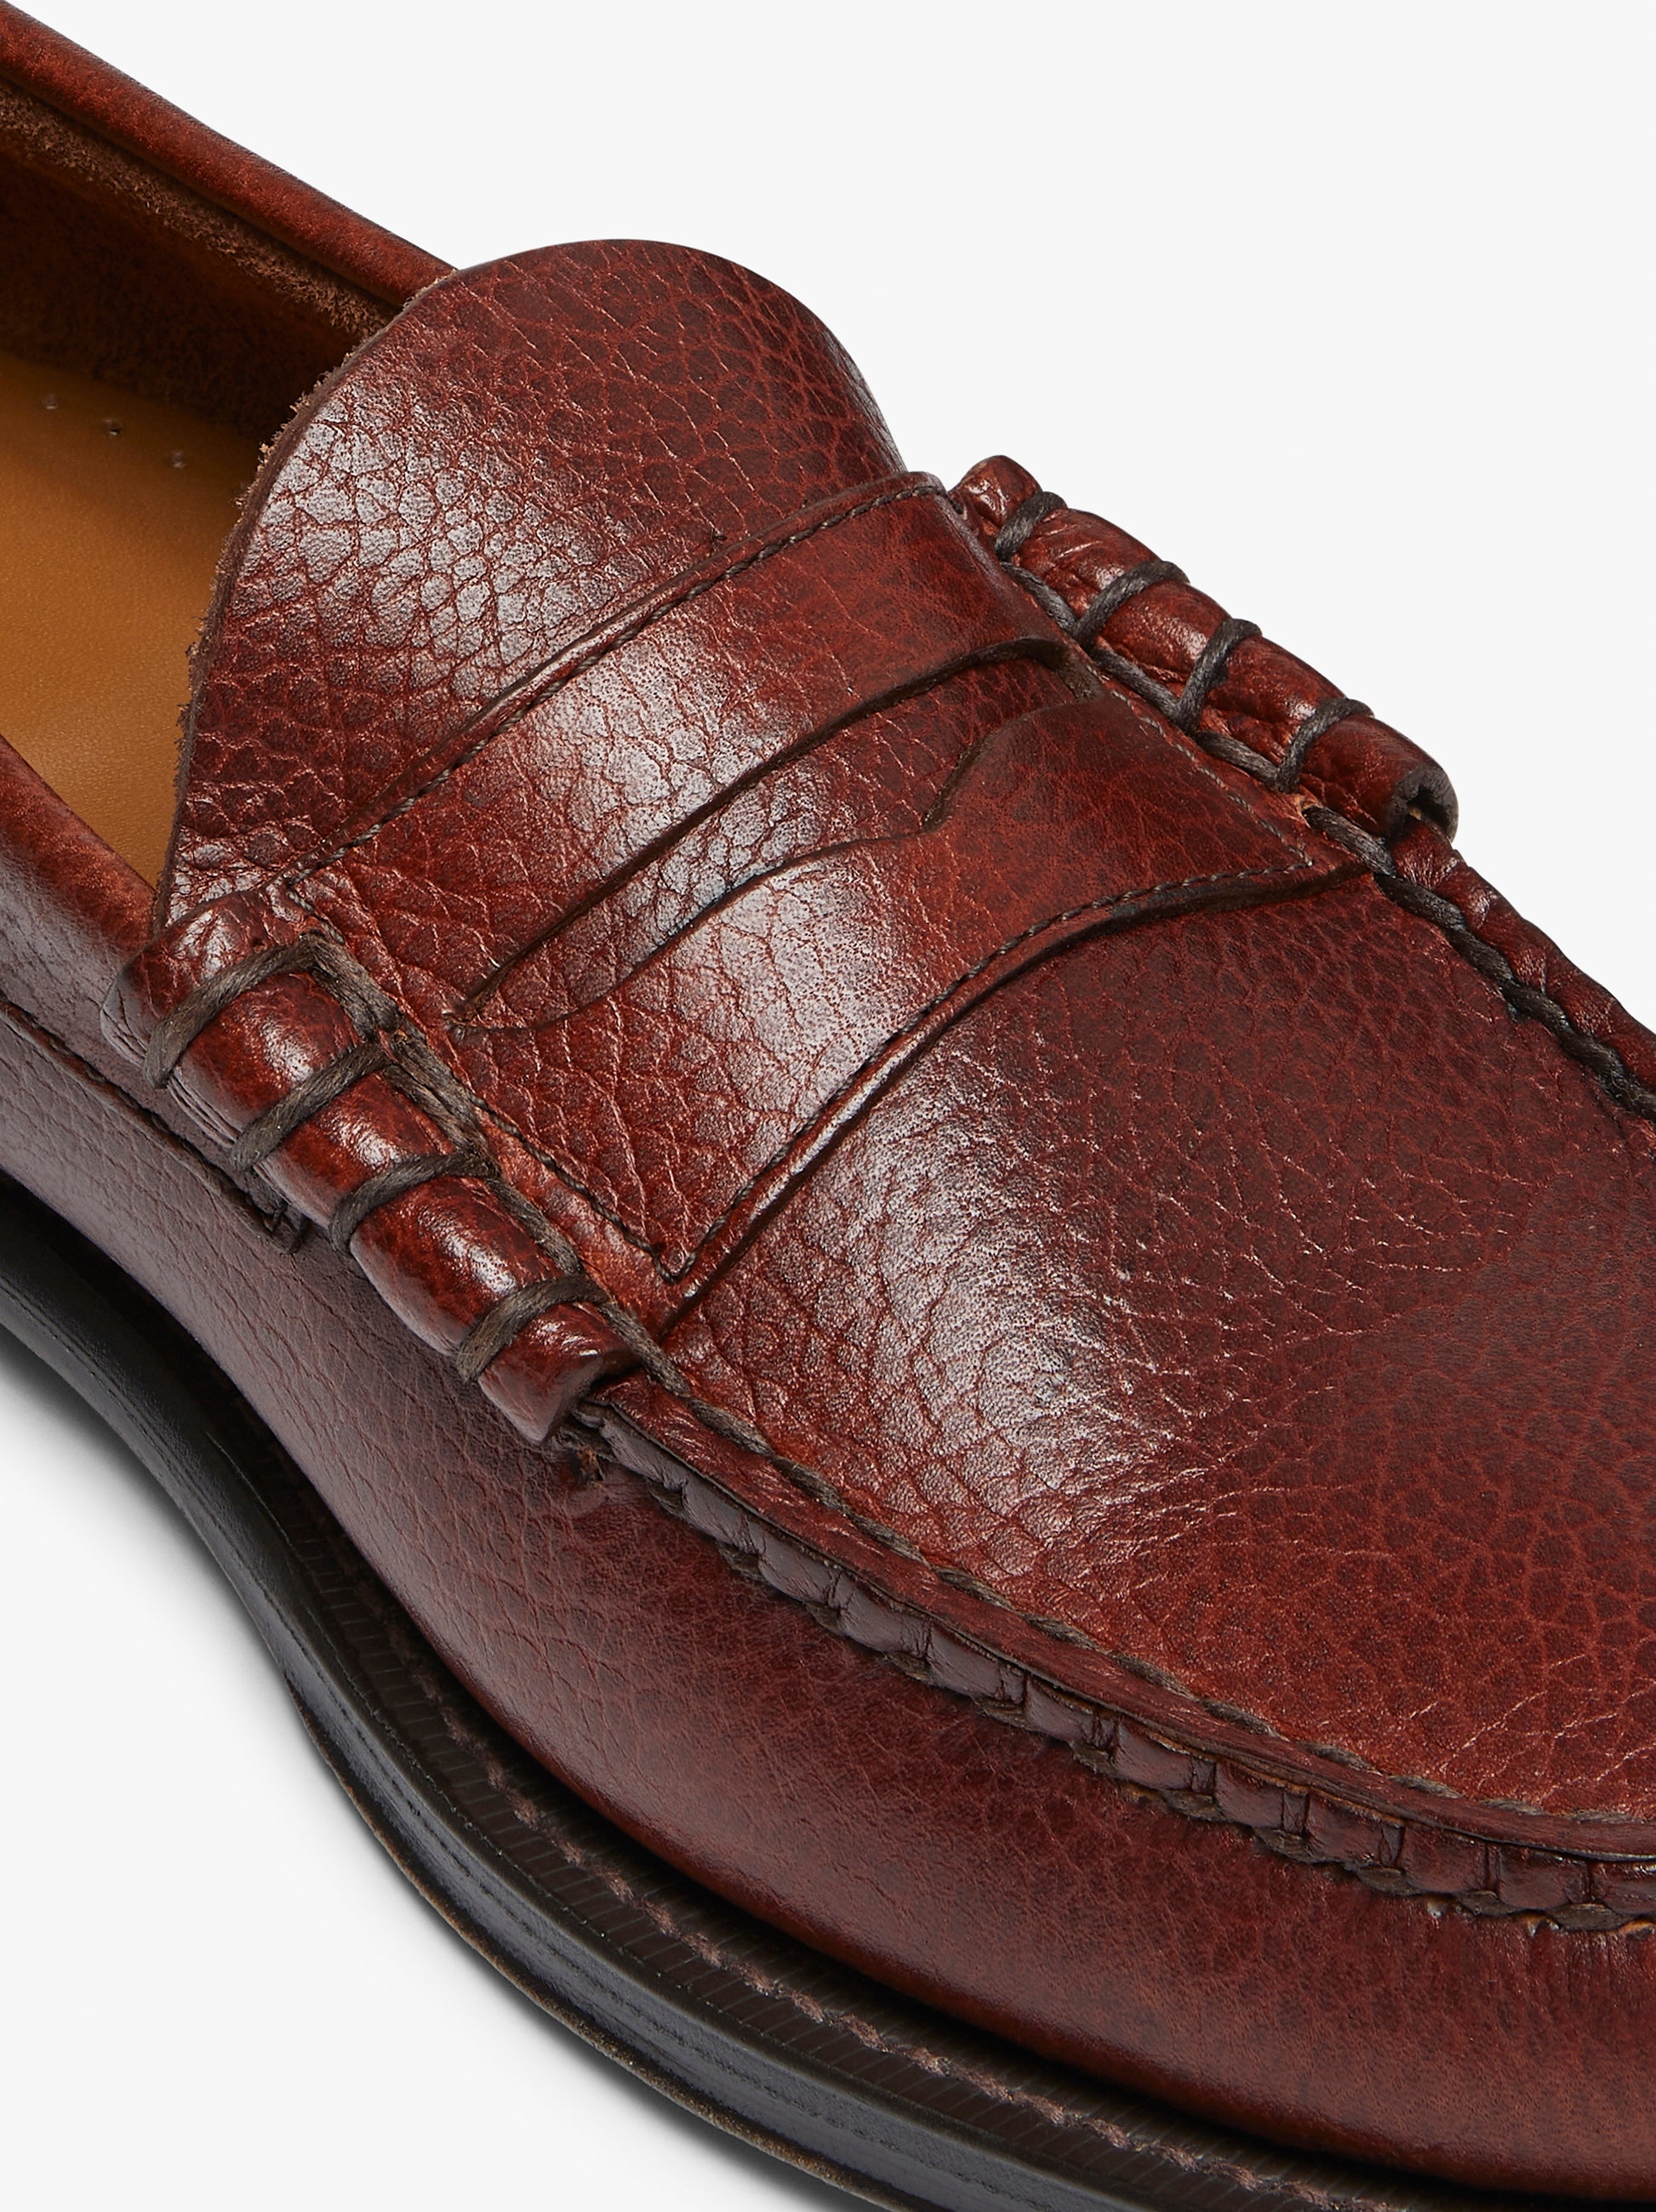 Dark Brown Leather Loafers Mens | Dark Brown Loafers – G.H.BASS 1876